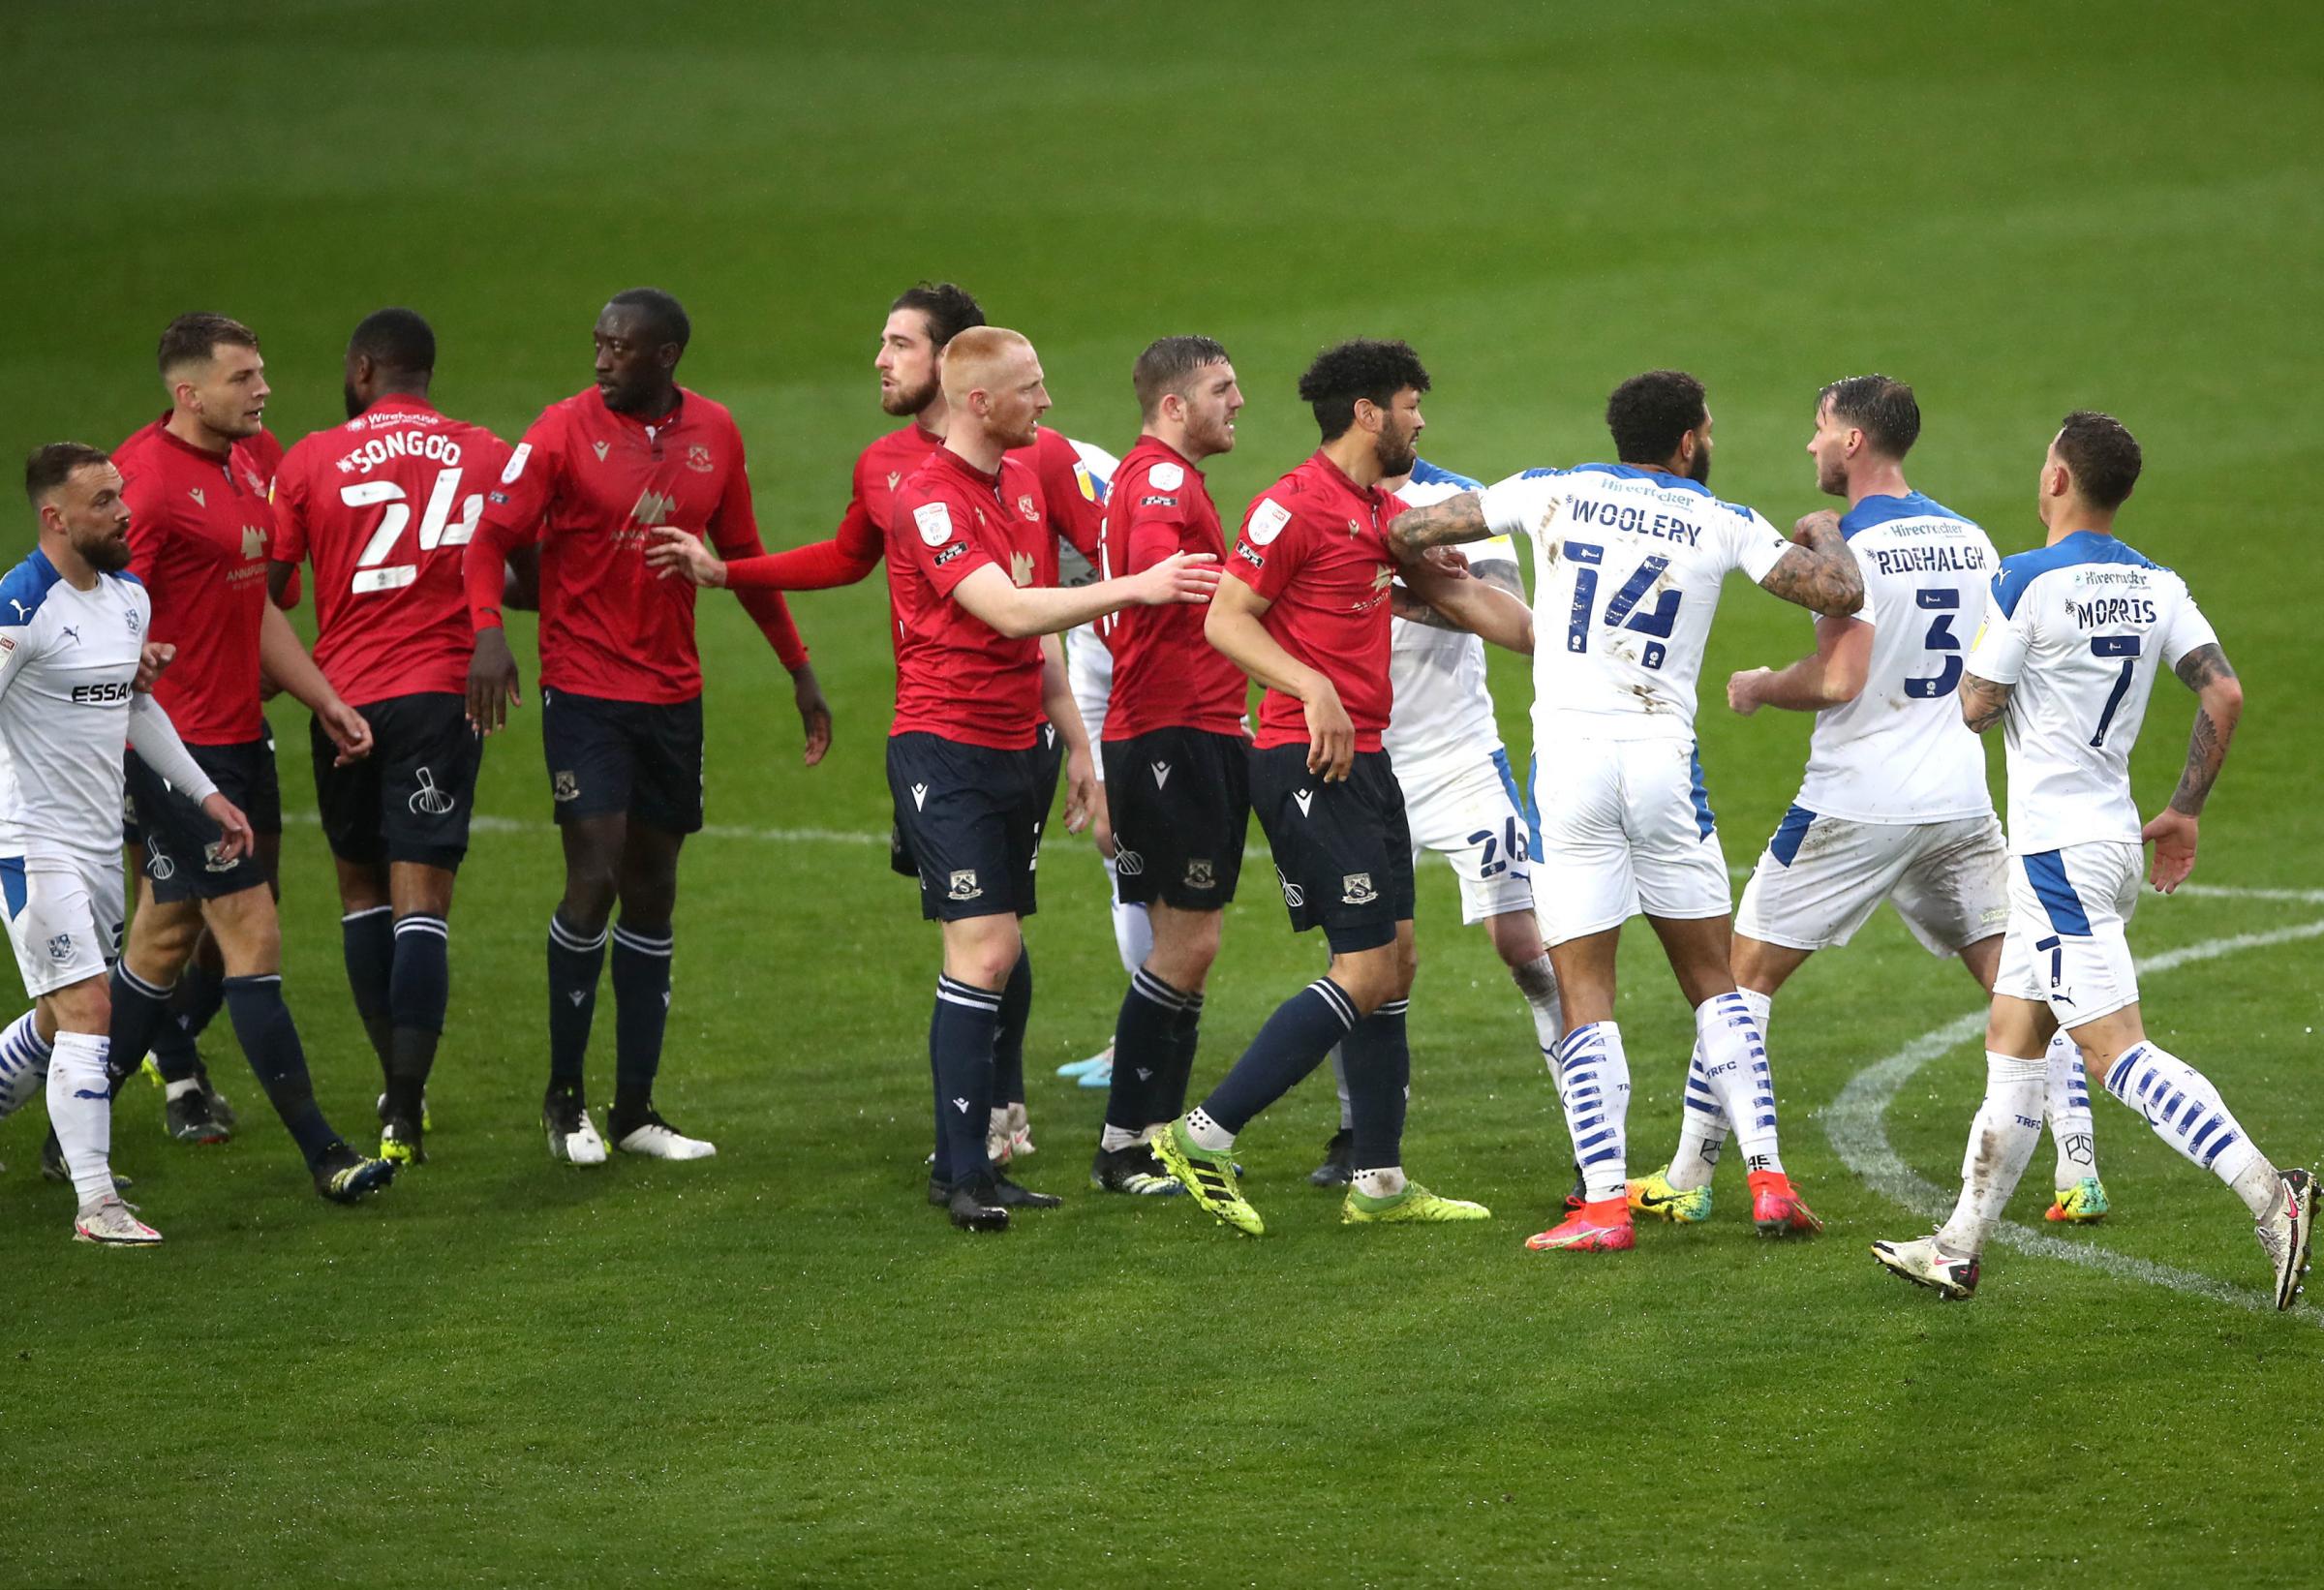 Tranmere Rovers and Morecambe players clash during the Sky Bet League two, play-off semi final at Prenton Park, Tranmere. Picture date: Thursday May 20, 2021. PA Photo. See PA story SOCCER Tranmere. Photo credit should read: Tim Goode/PA